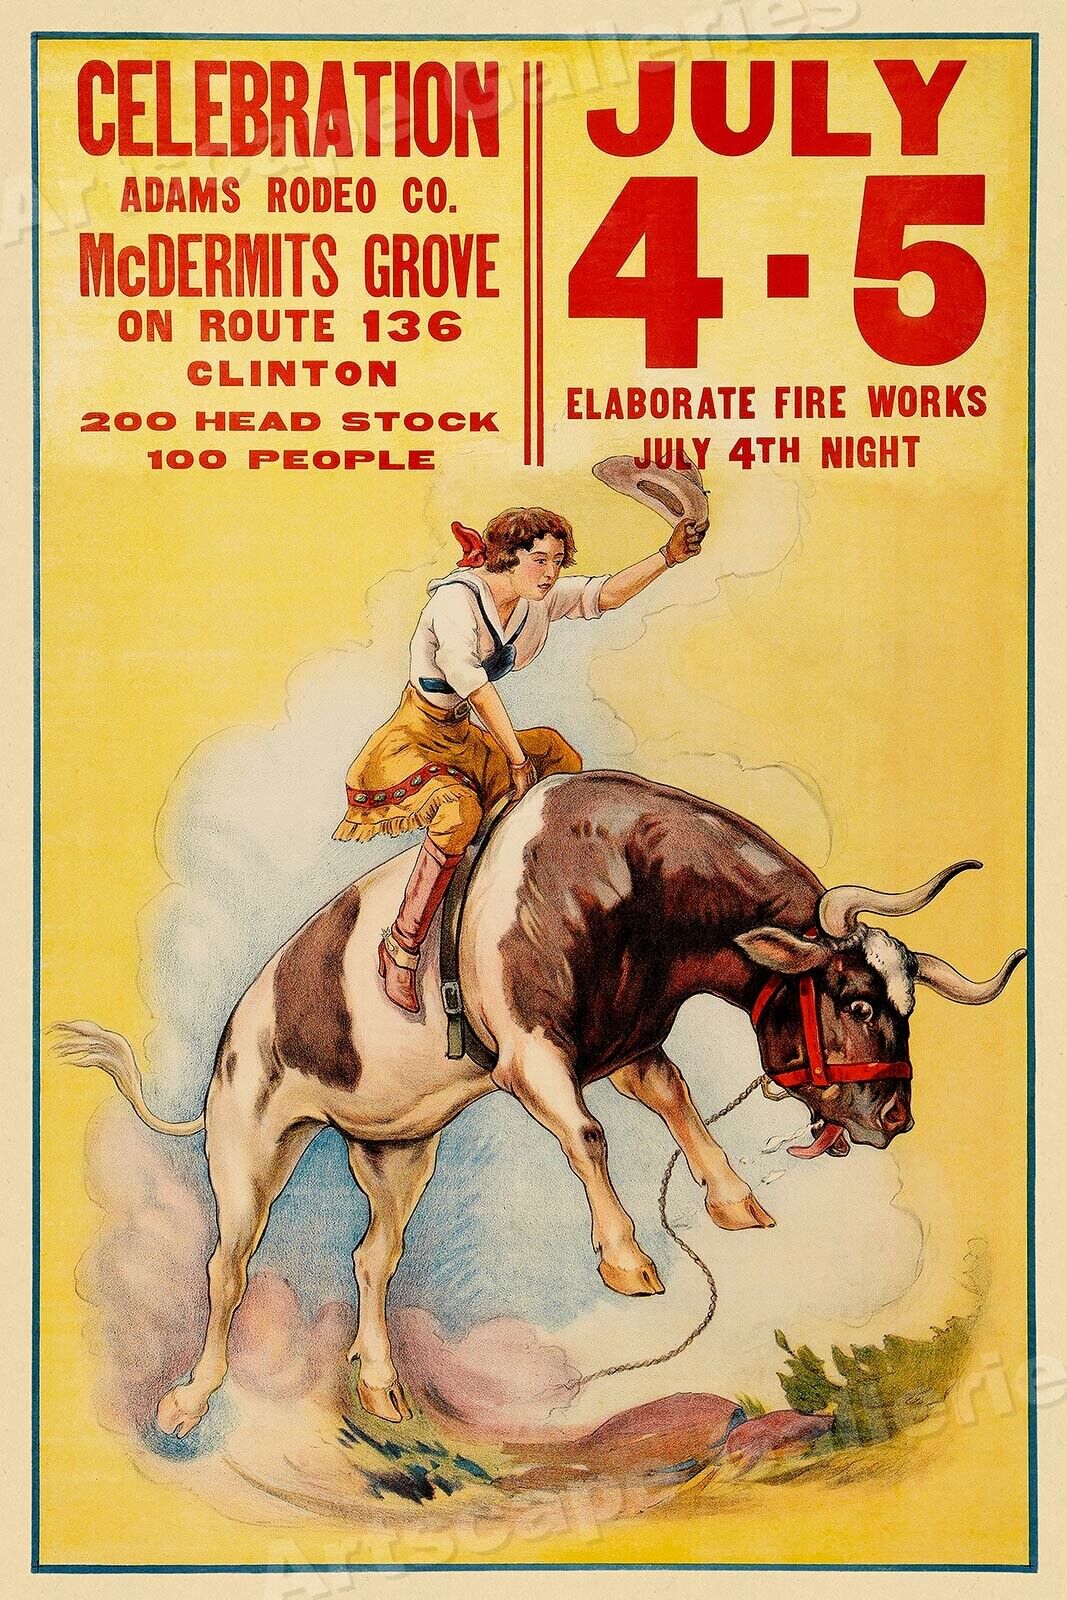 Cowgirl 1930s Western Rodeo Celebration Vintage Style Poster - 20x30